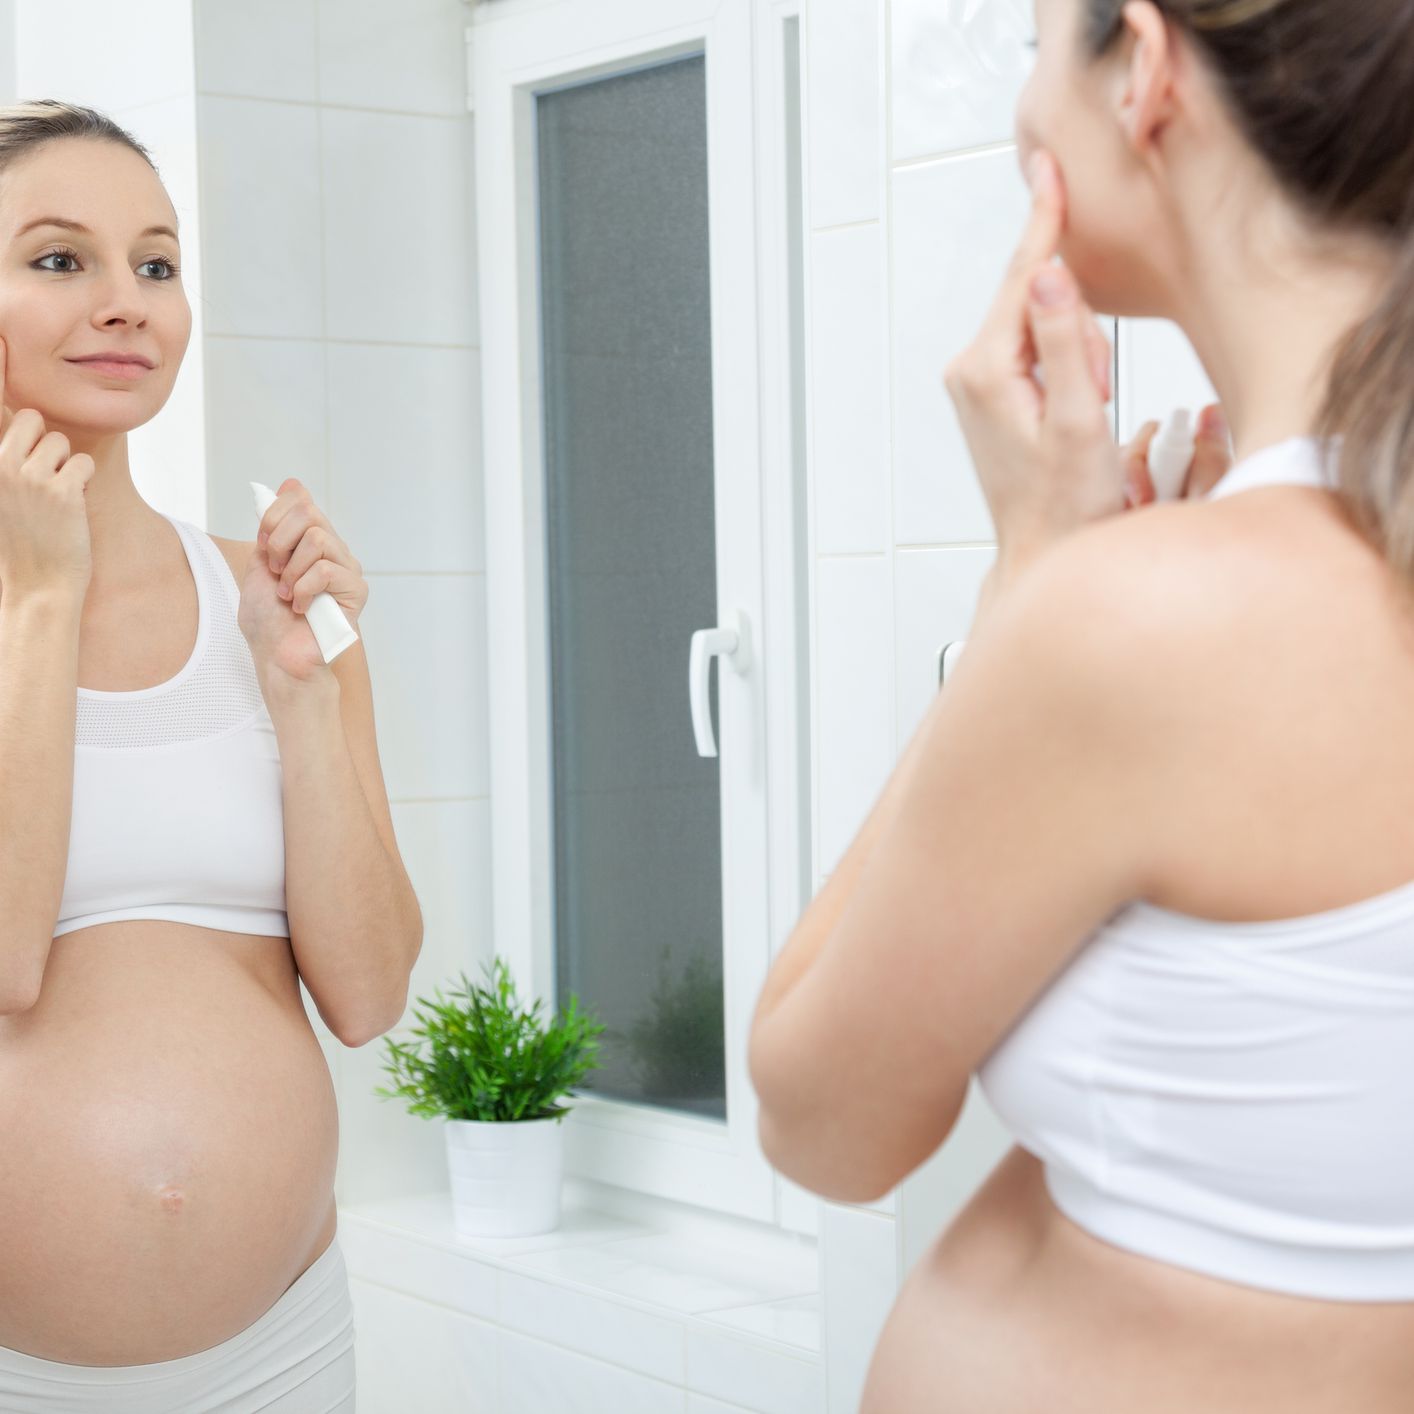 Acne in Pregnant Women: Major Causes and Treatment